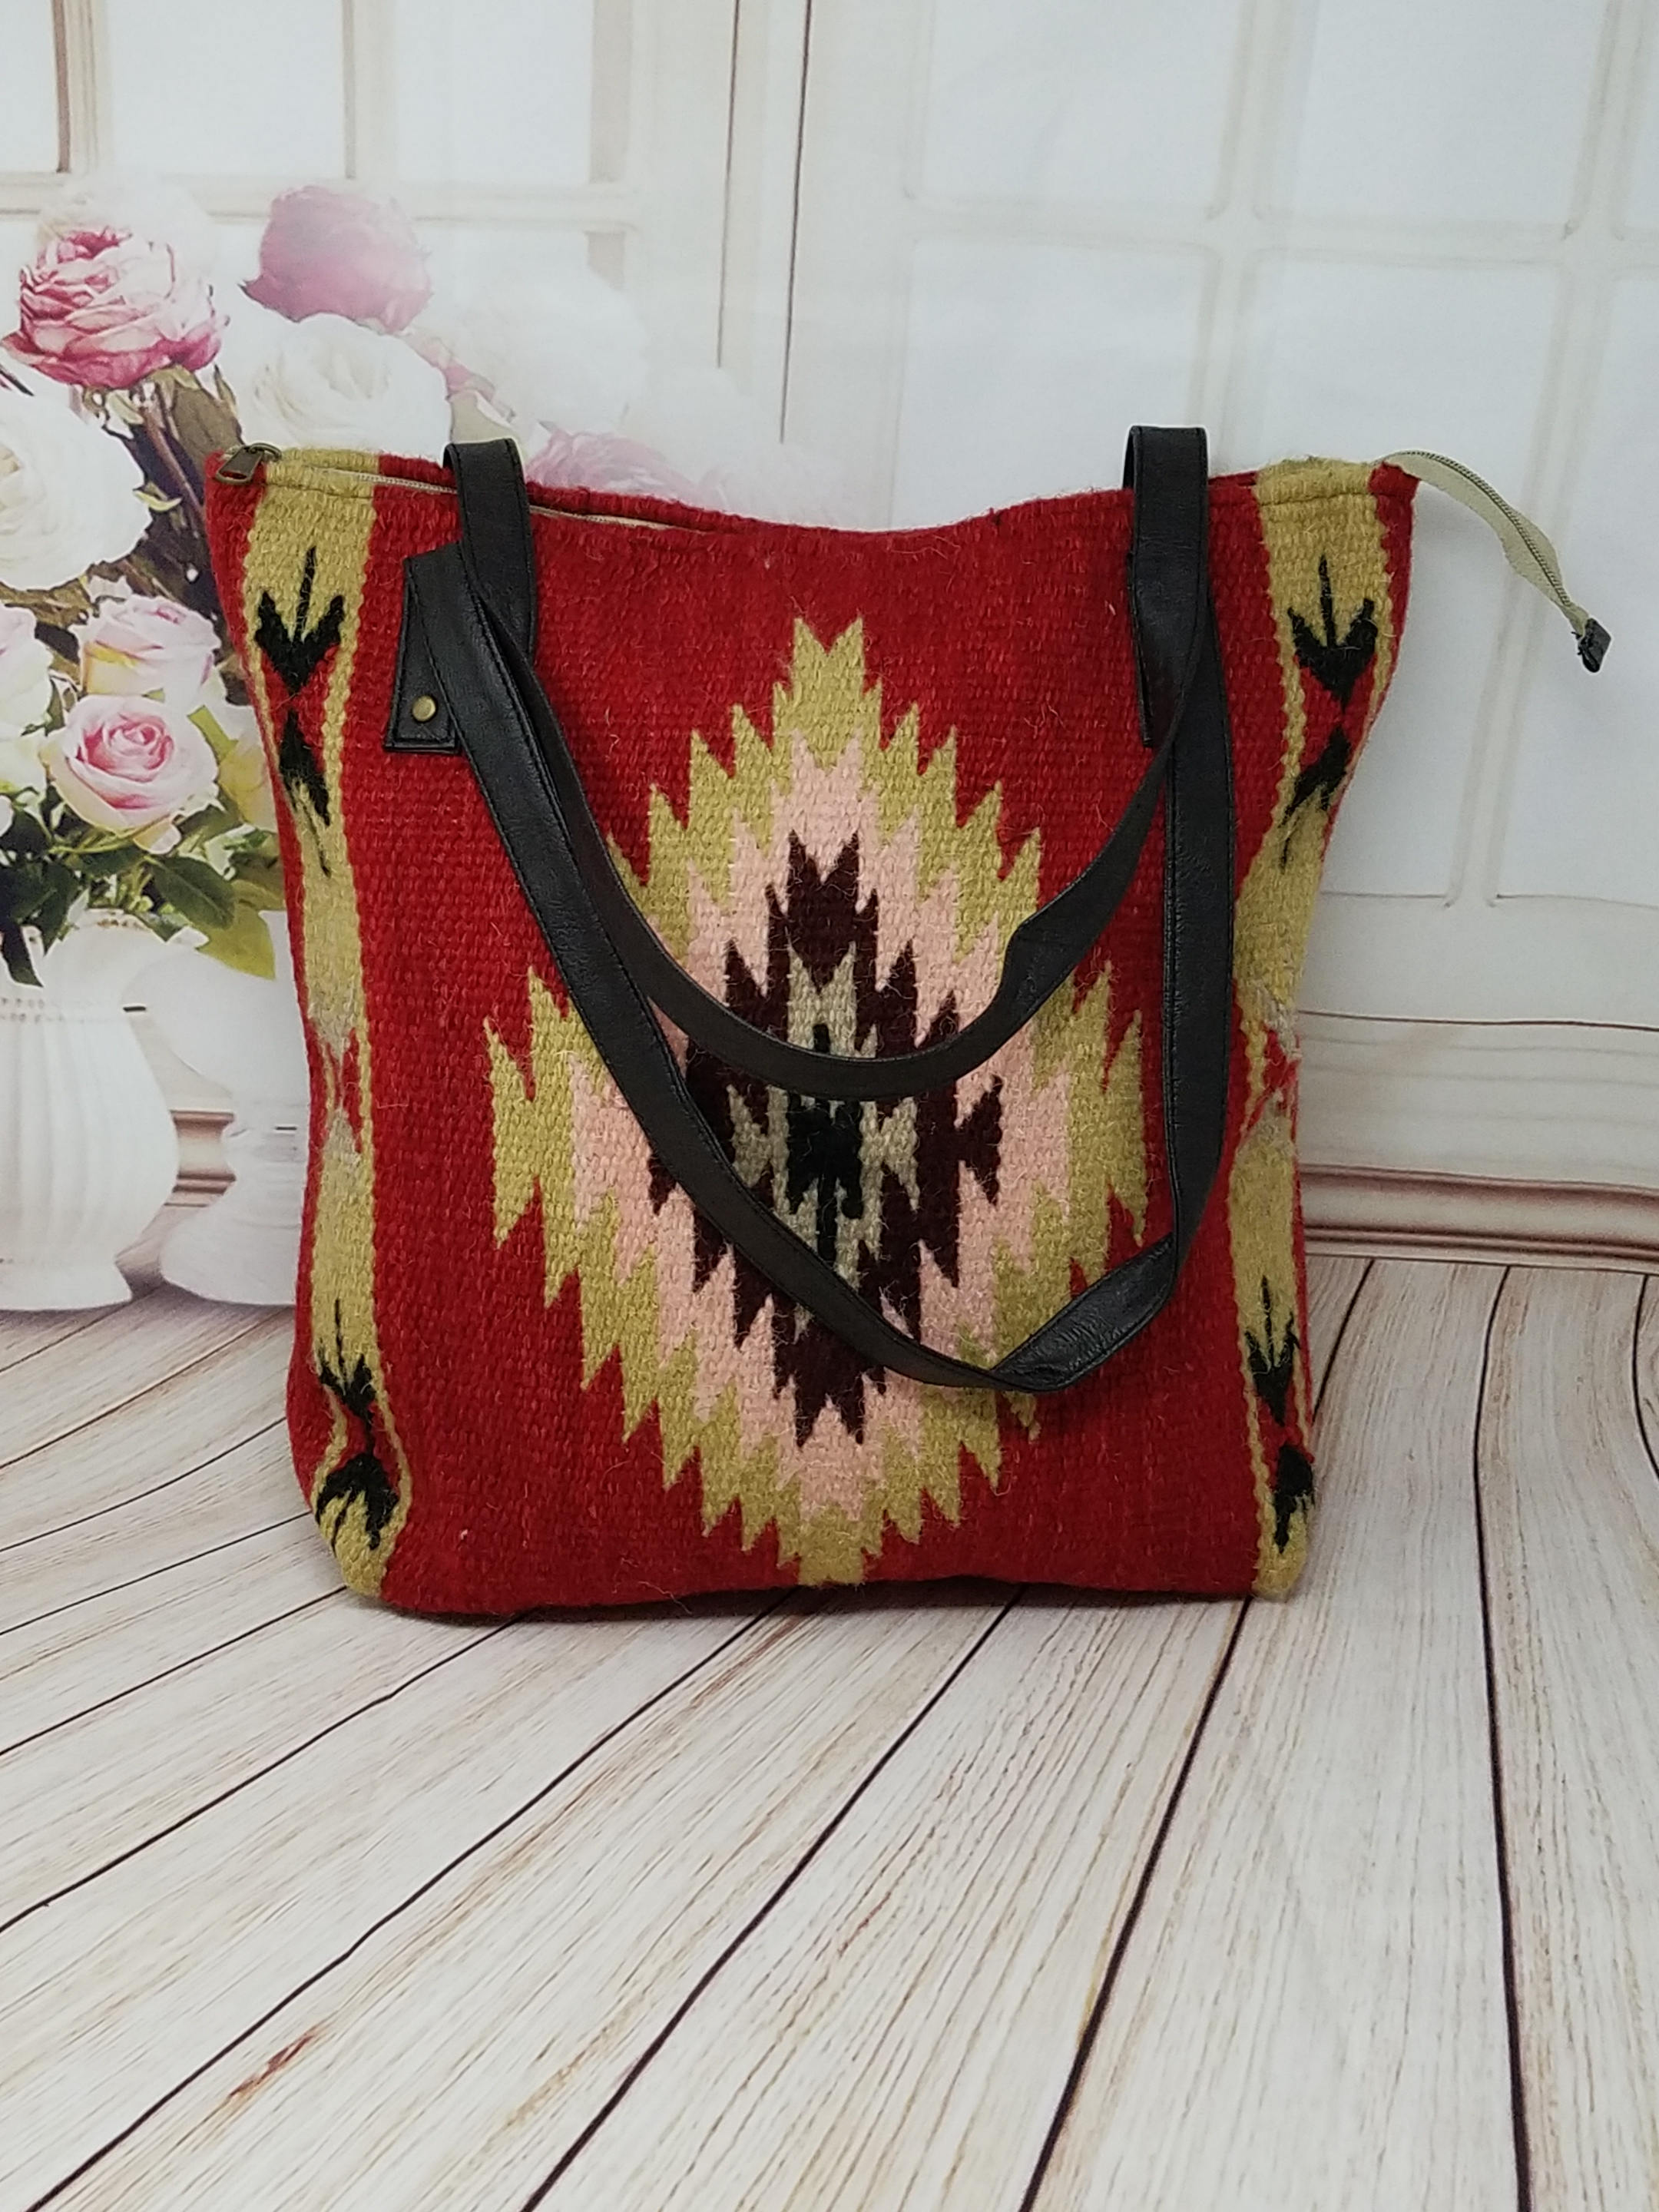 Multicolor Woven Kilim Bag Selected by Animal Vintage | Free People